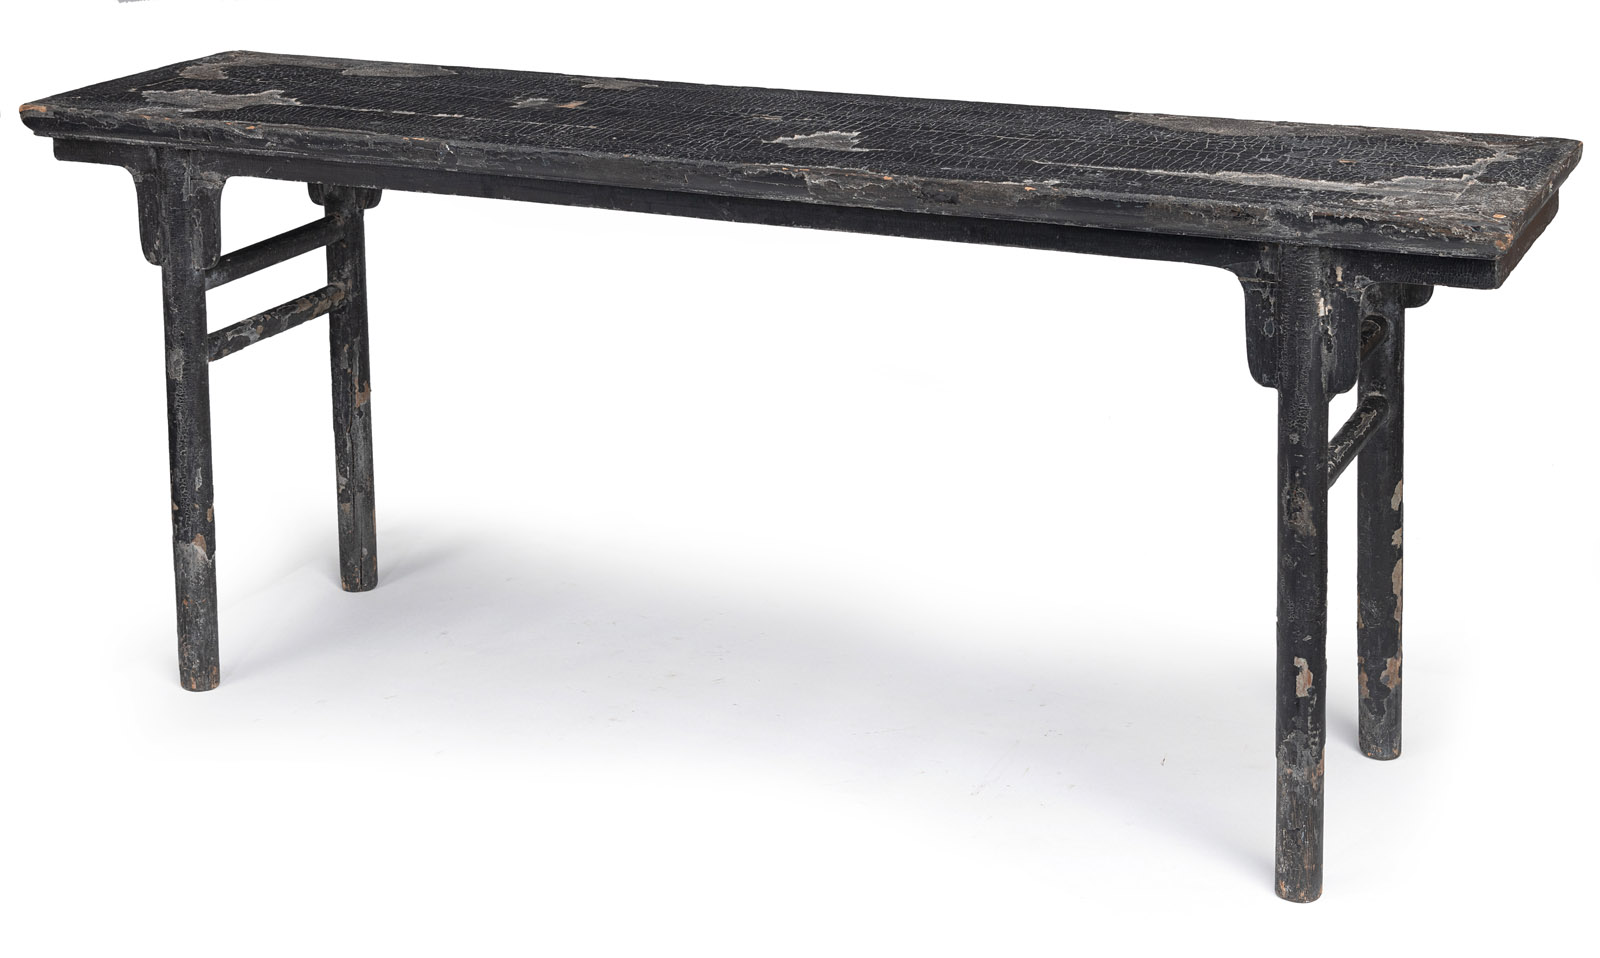 <b>A LARGE RECESSED-LEG BLACK-LACQUER-COATED ALTAR TABLE</b>